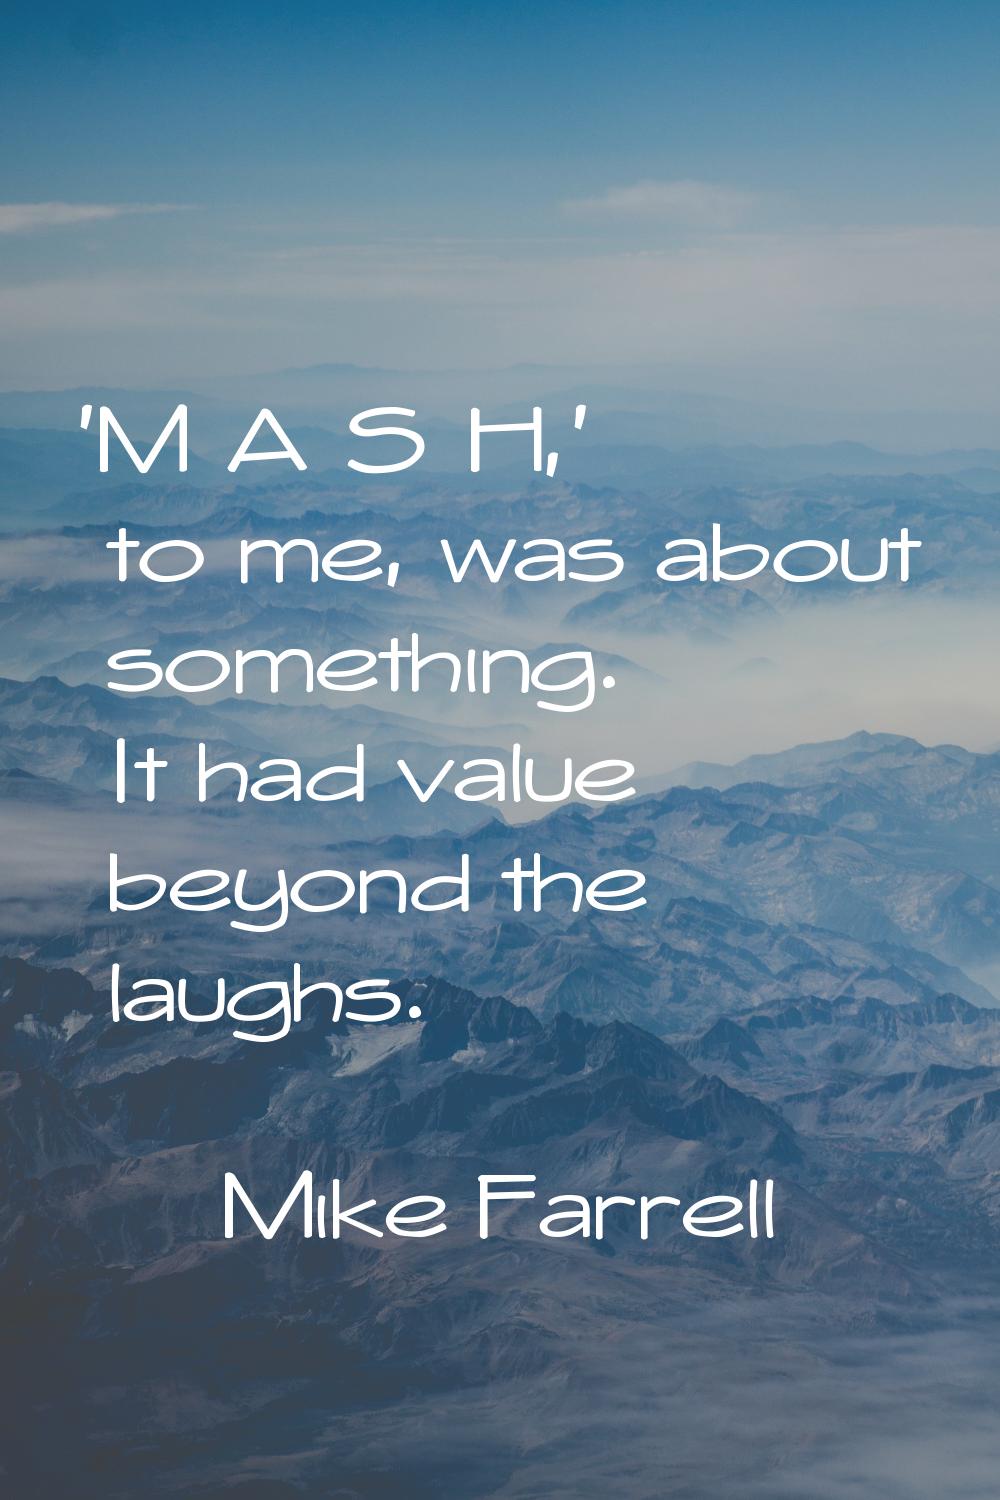 'M*A*S*H,' to me, was about something. It had value beyond the laughs.